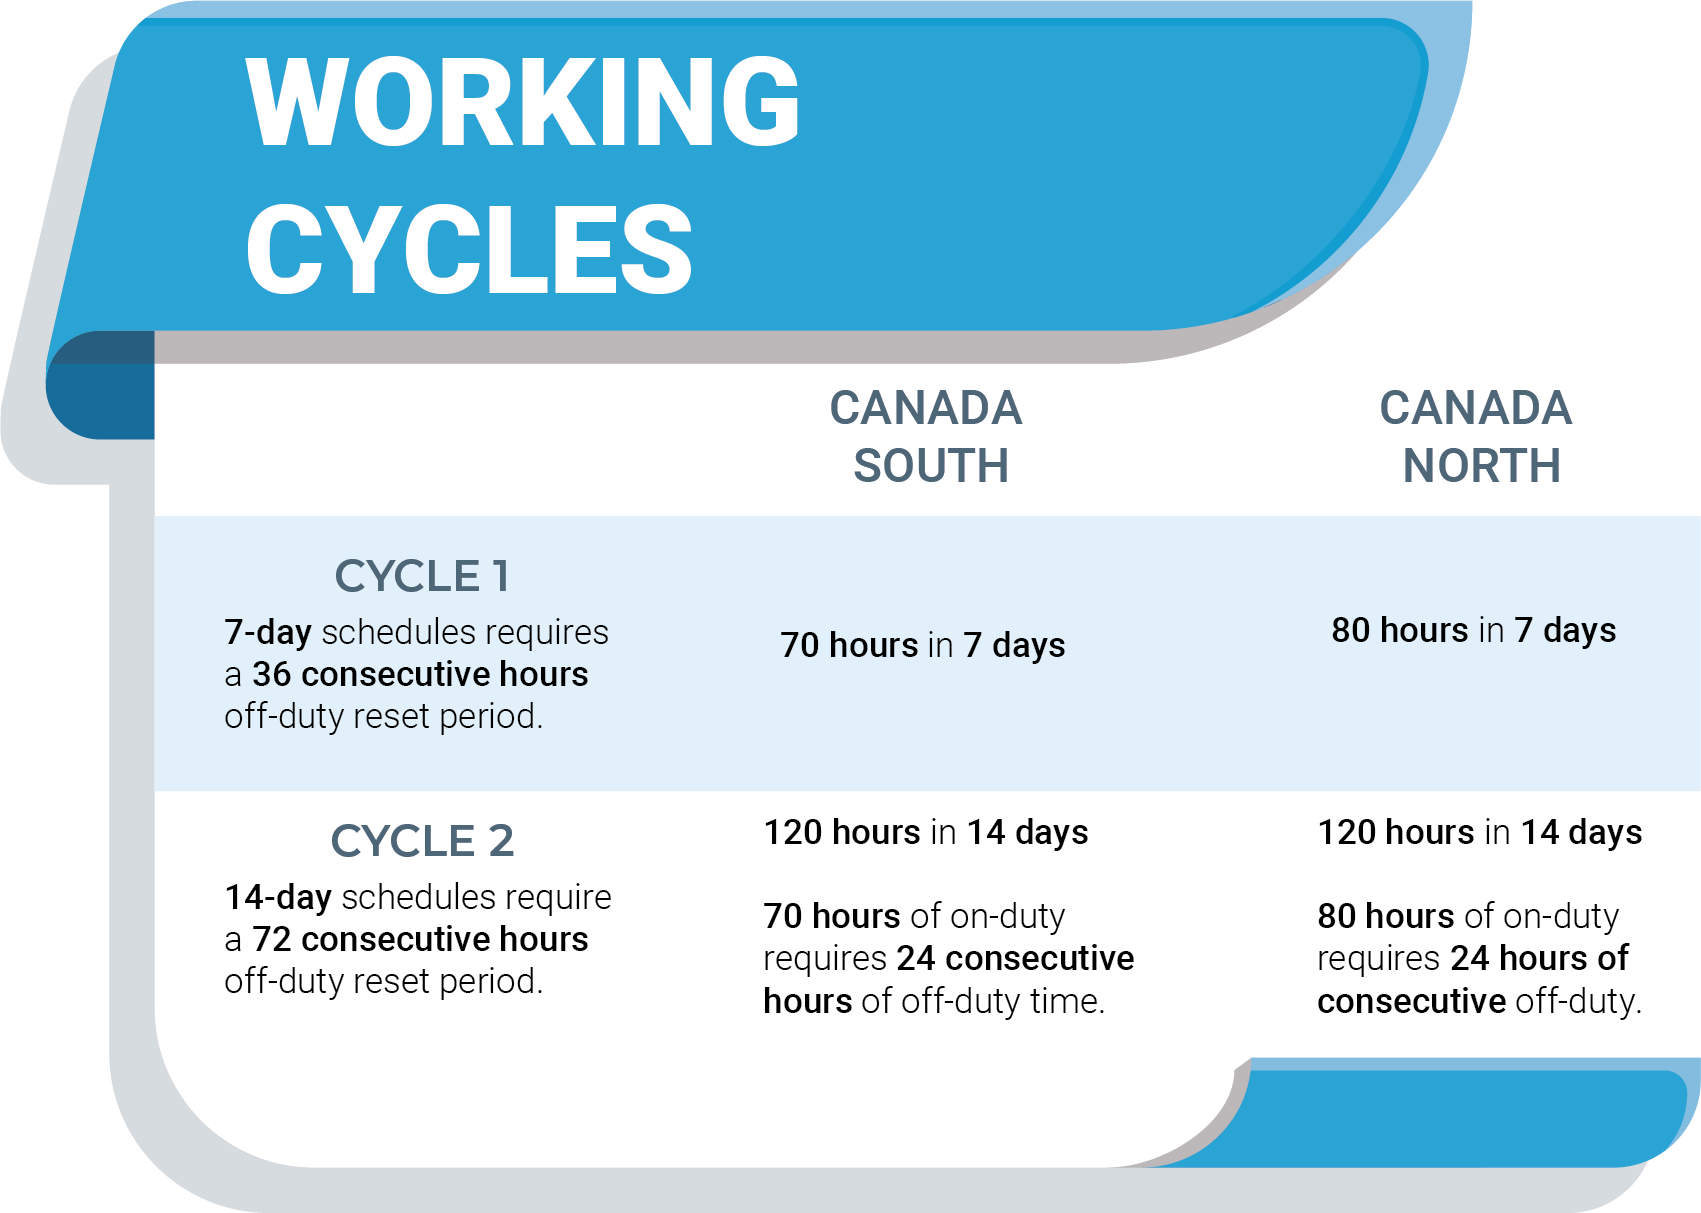 Working cycles for Canadian truck drivers regulations in the south and the north